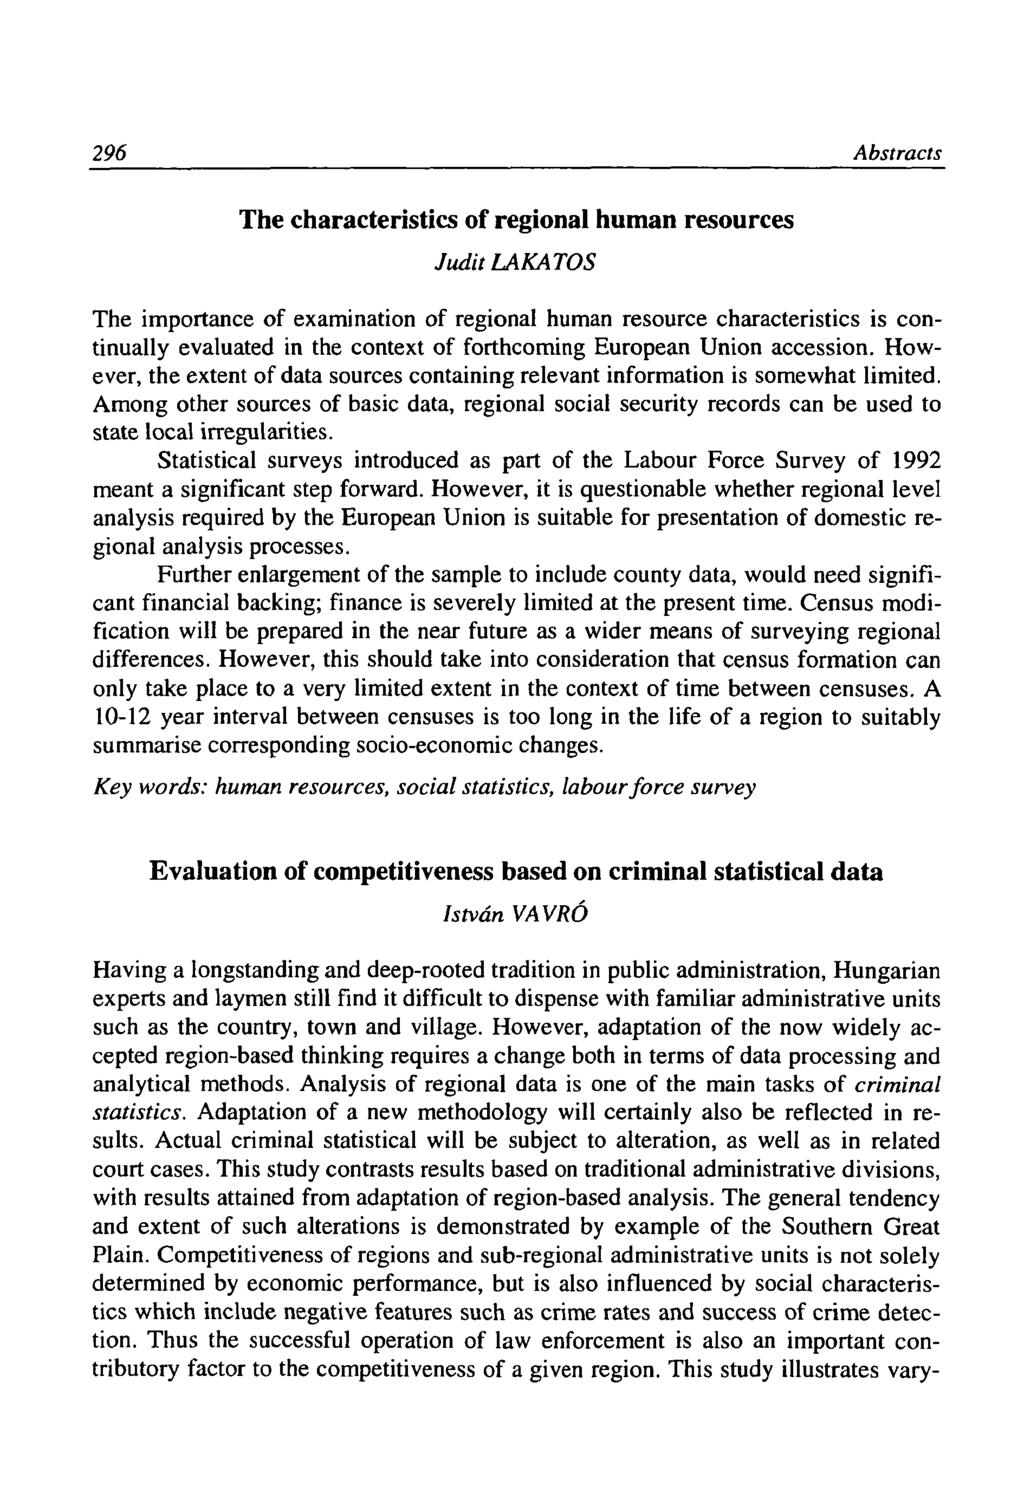 296 Abstracts The characteristics of regional human resources Judit LAKATOS The importance of examination of regional human resource characteristics is continually evaluated in the context of